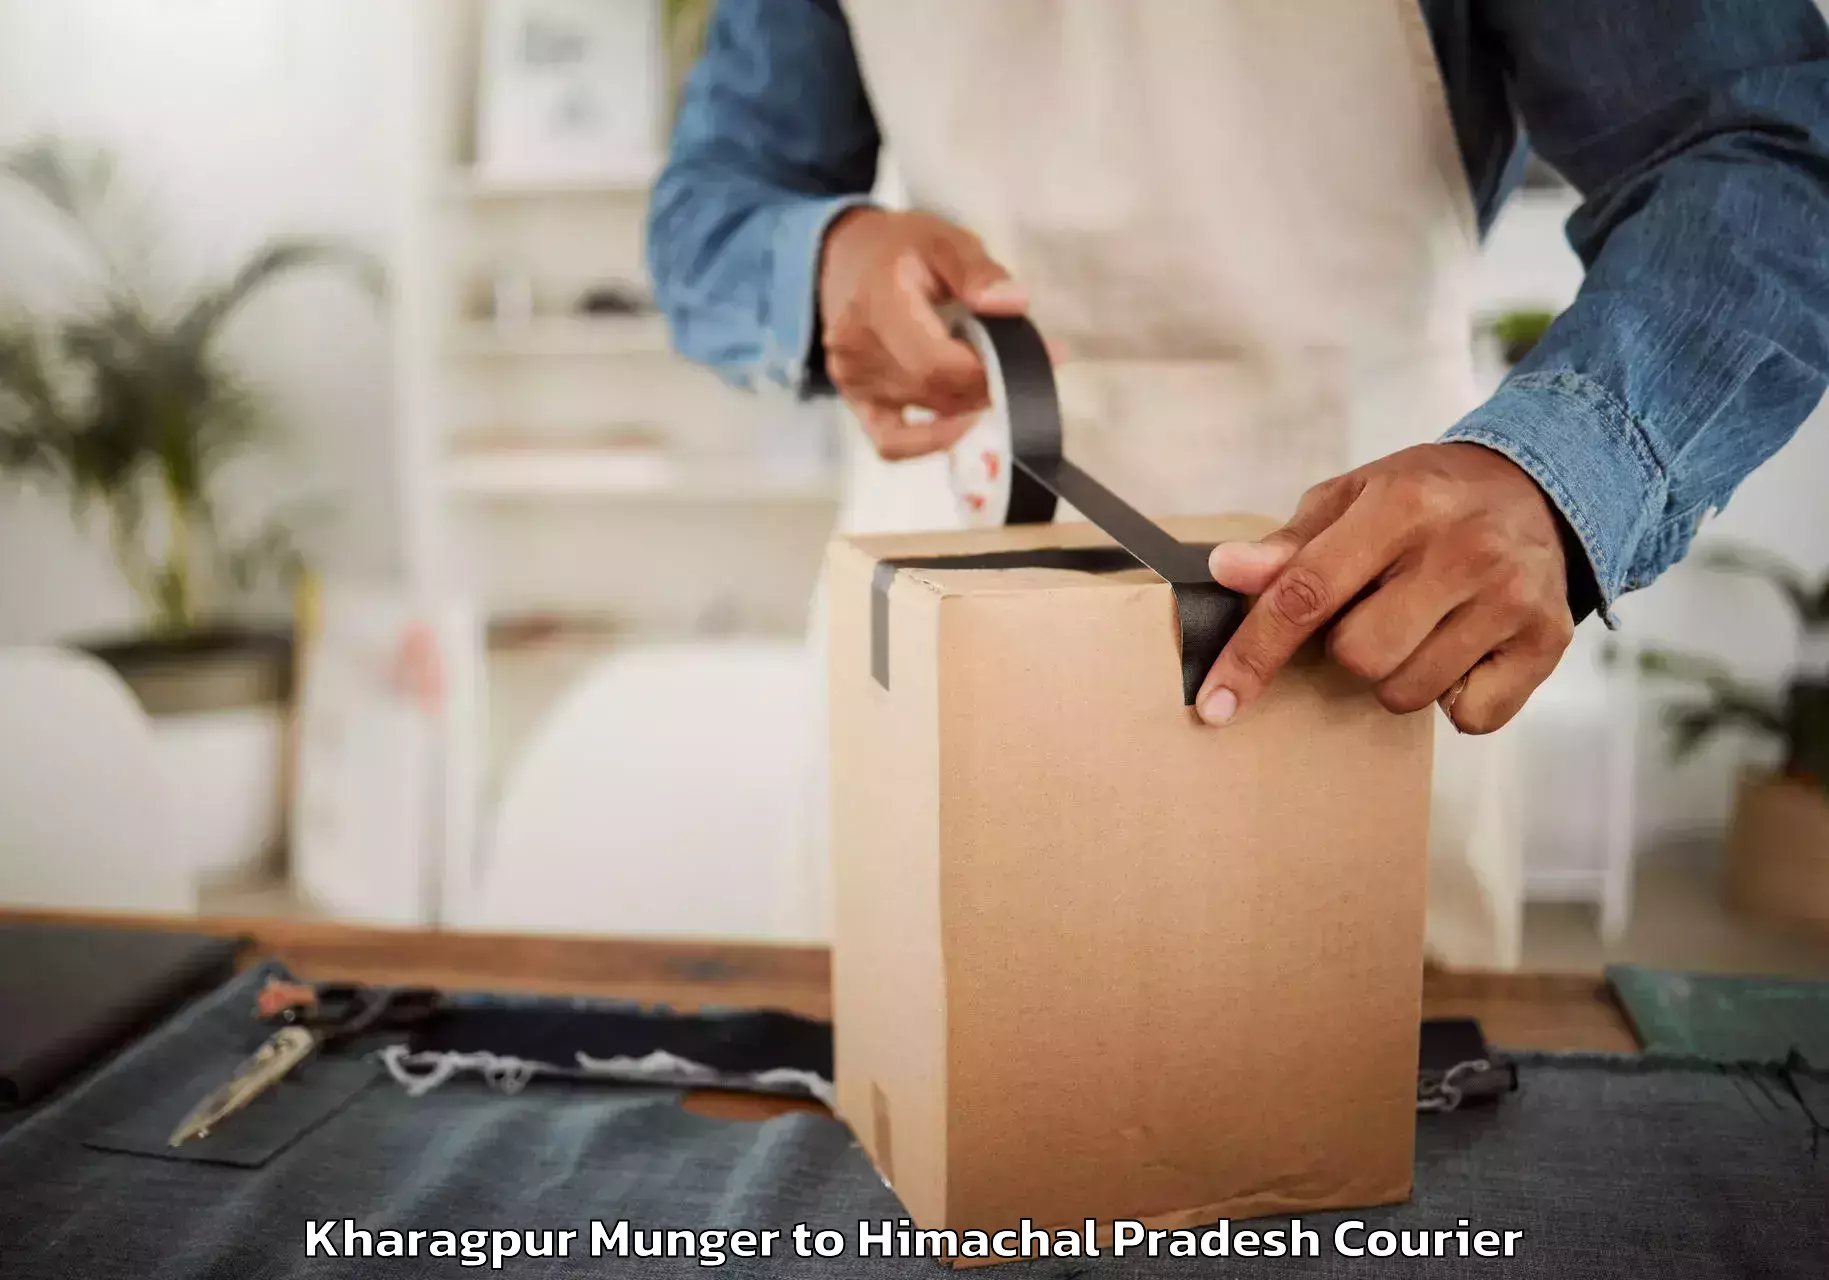 Household goods movers and packers Kharagpur Munger to Una Himachal Pradesh